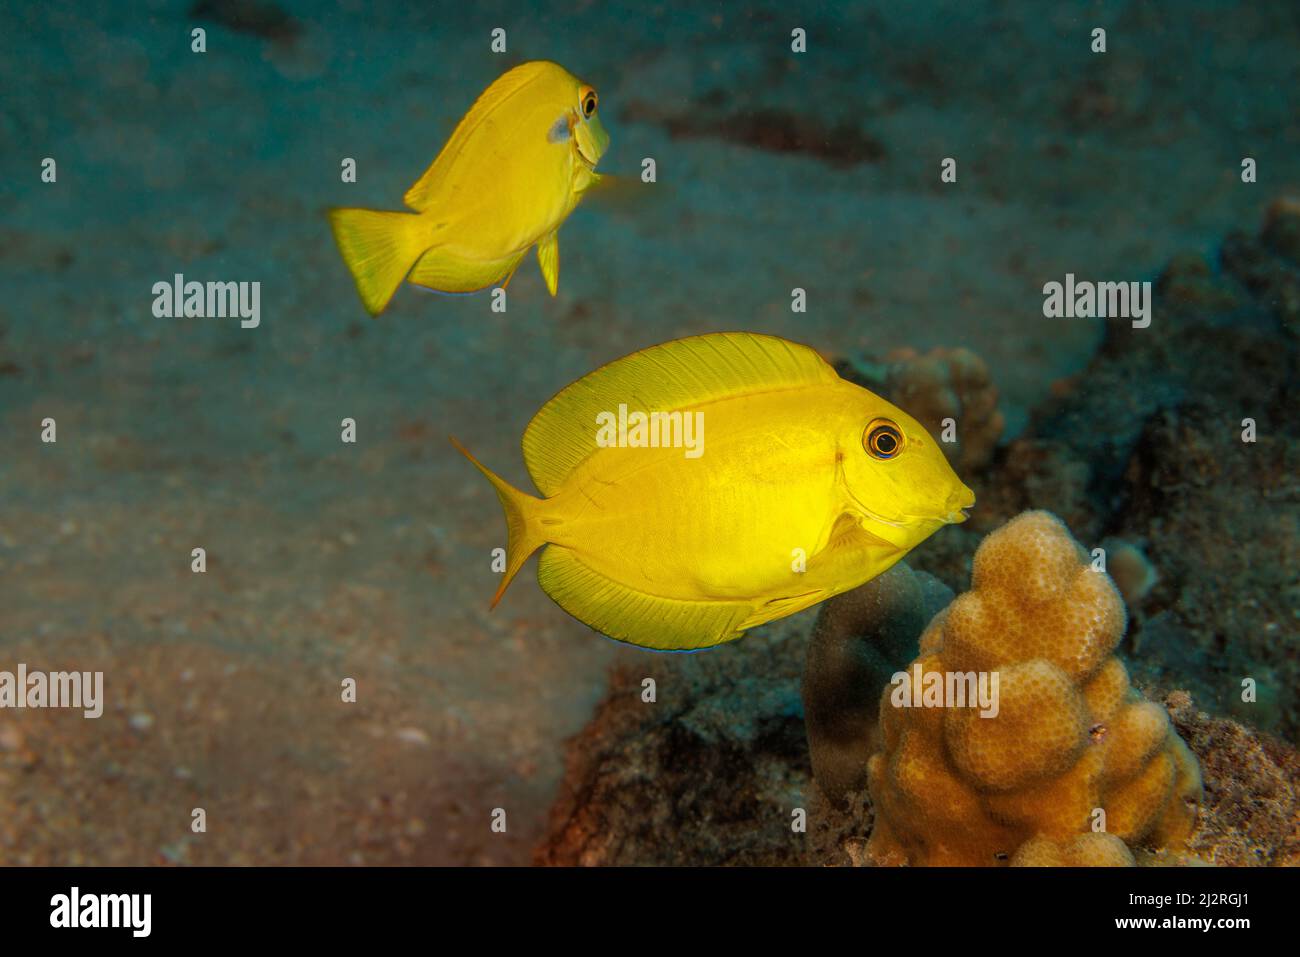 These juvenile orangeband surgeonfish, Acanthurus olivaceus, will look completely different as adults, Hawaii. Stock Photo